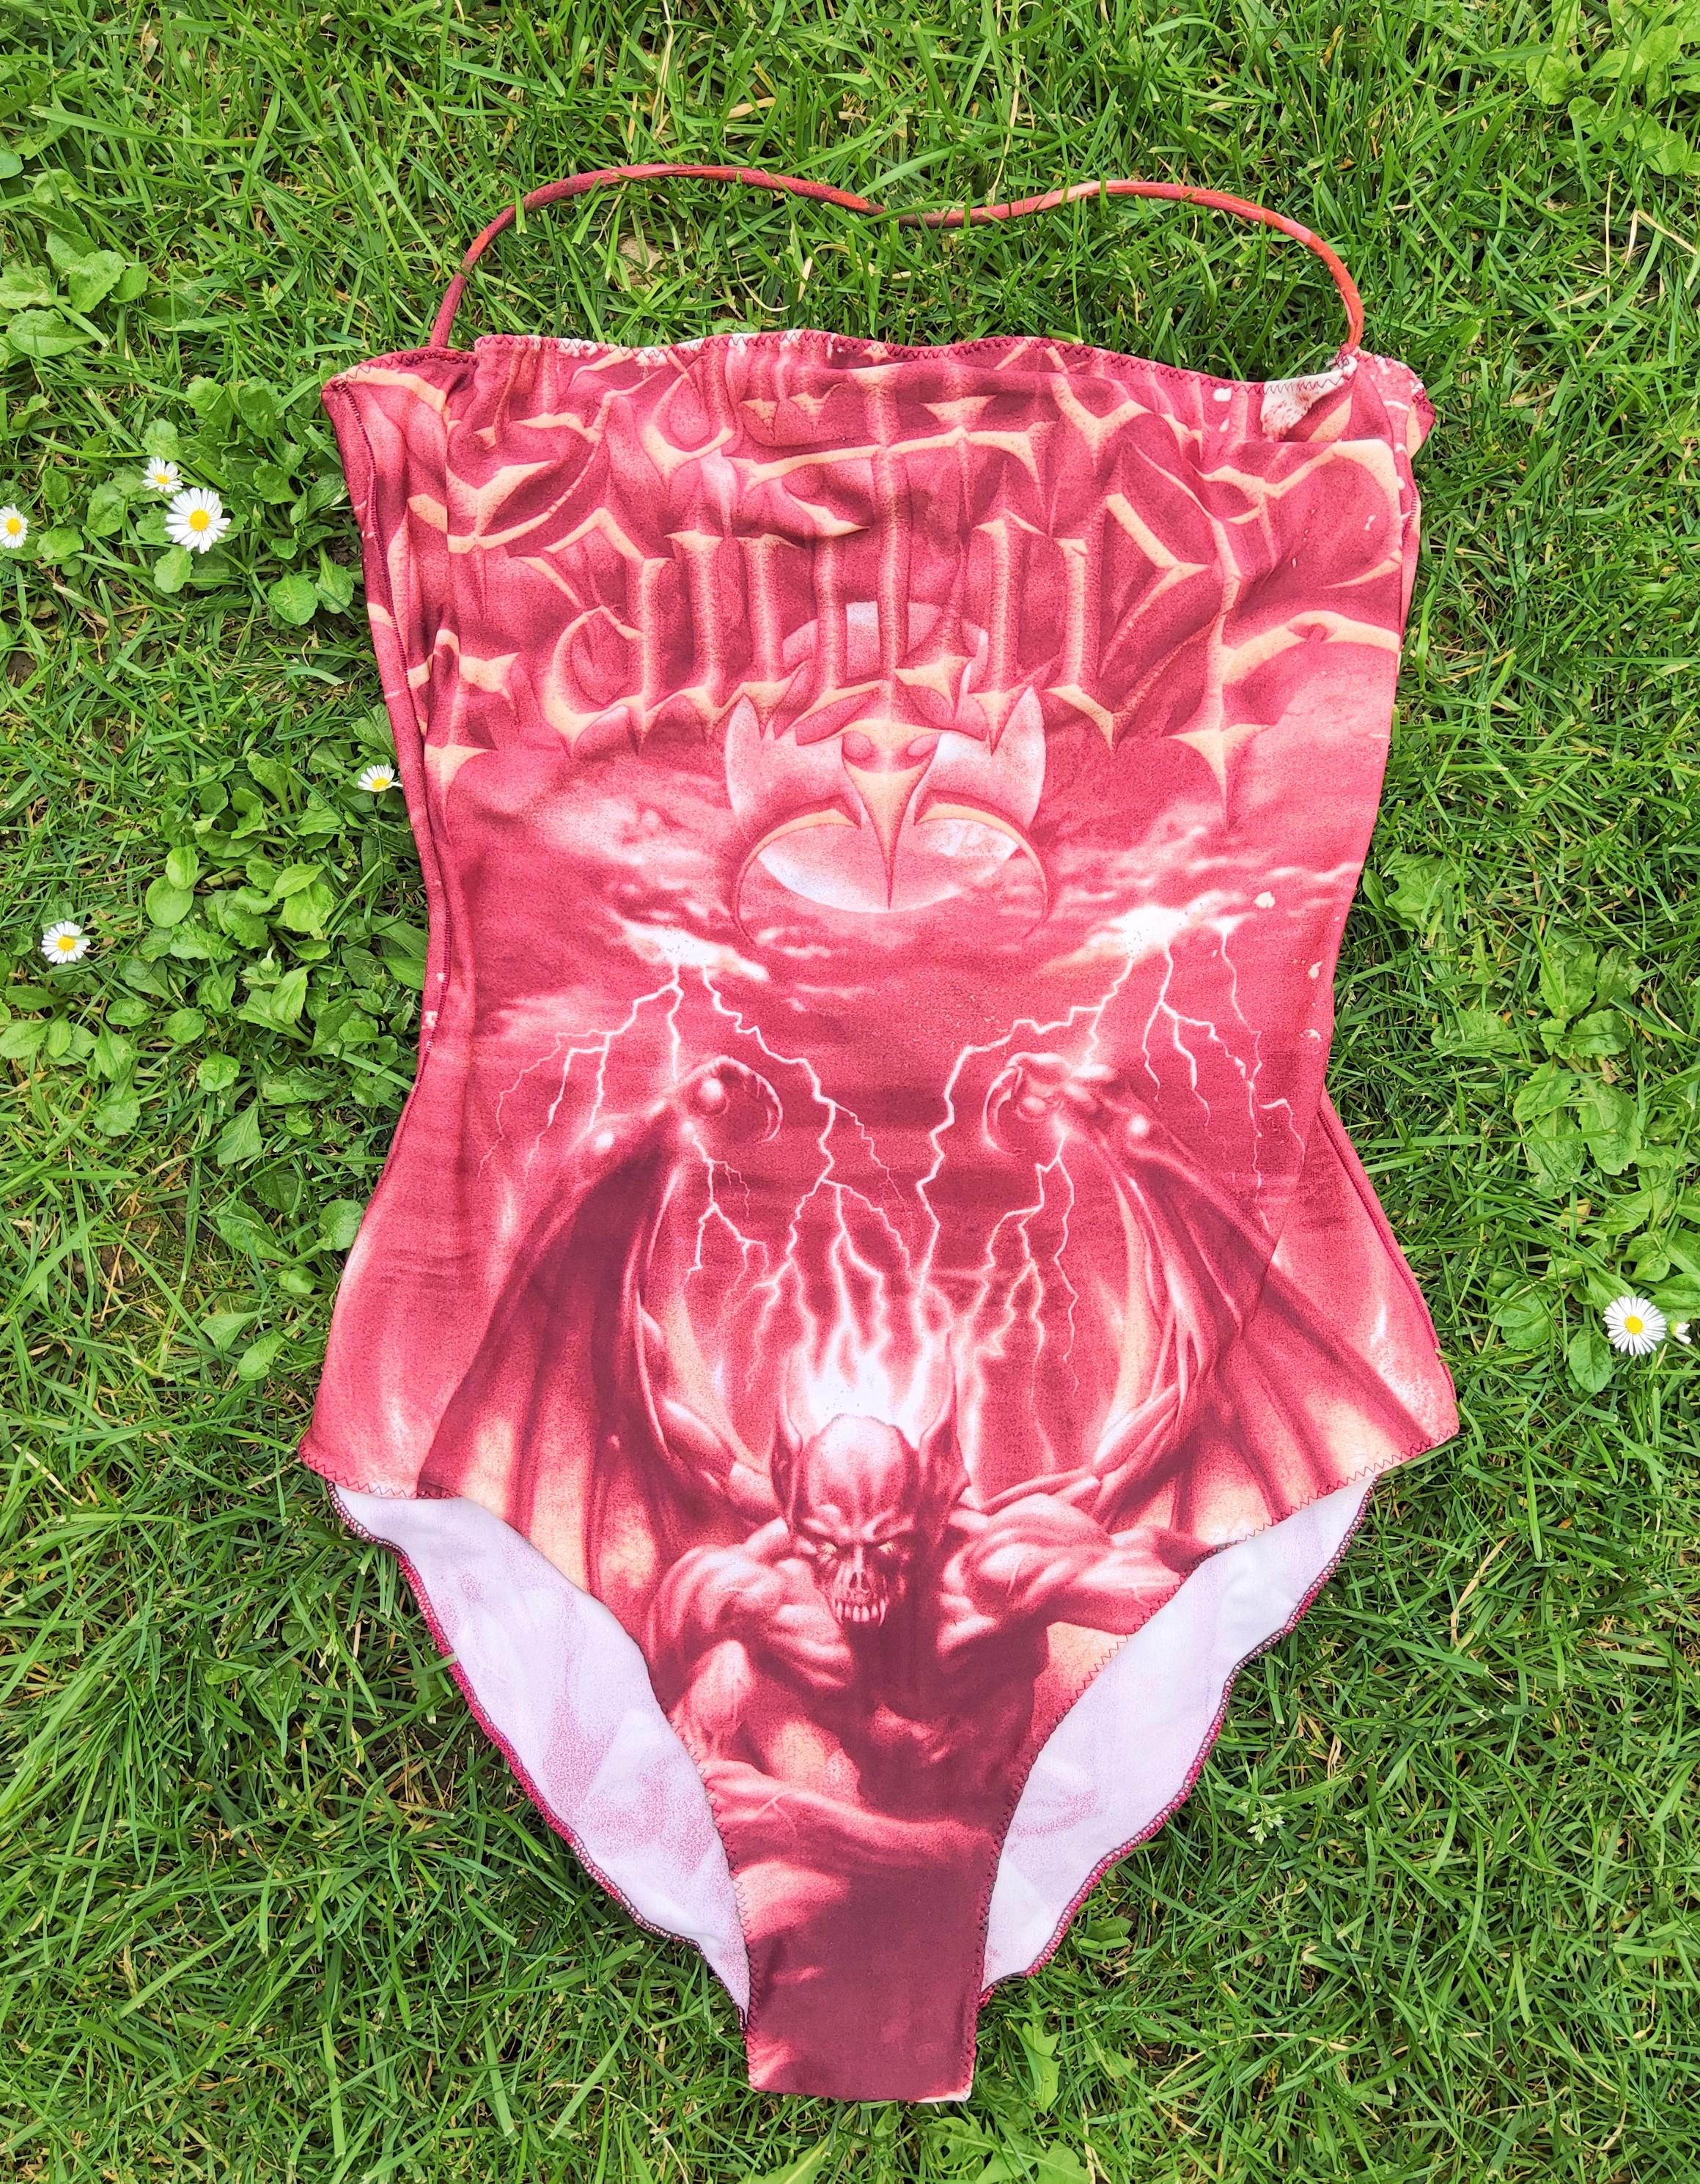 Iconic Satan swimsuit by Jean Paul Gaultier!

References shaped his Spring/Summer 2001 collection, as proven by the show’s invitational that was adorned with Rock motifs such as Skulls, Bats, and Infernal Flames. To that effect, the desired